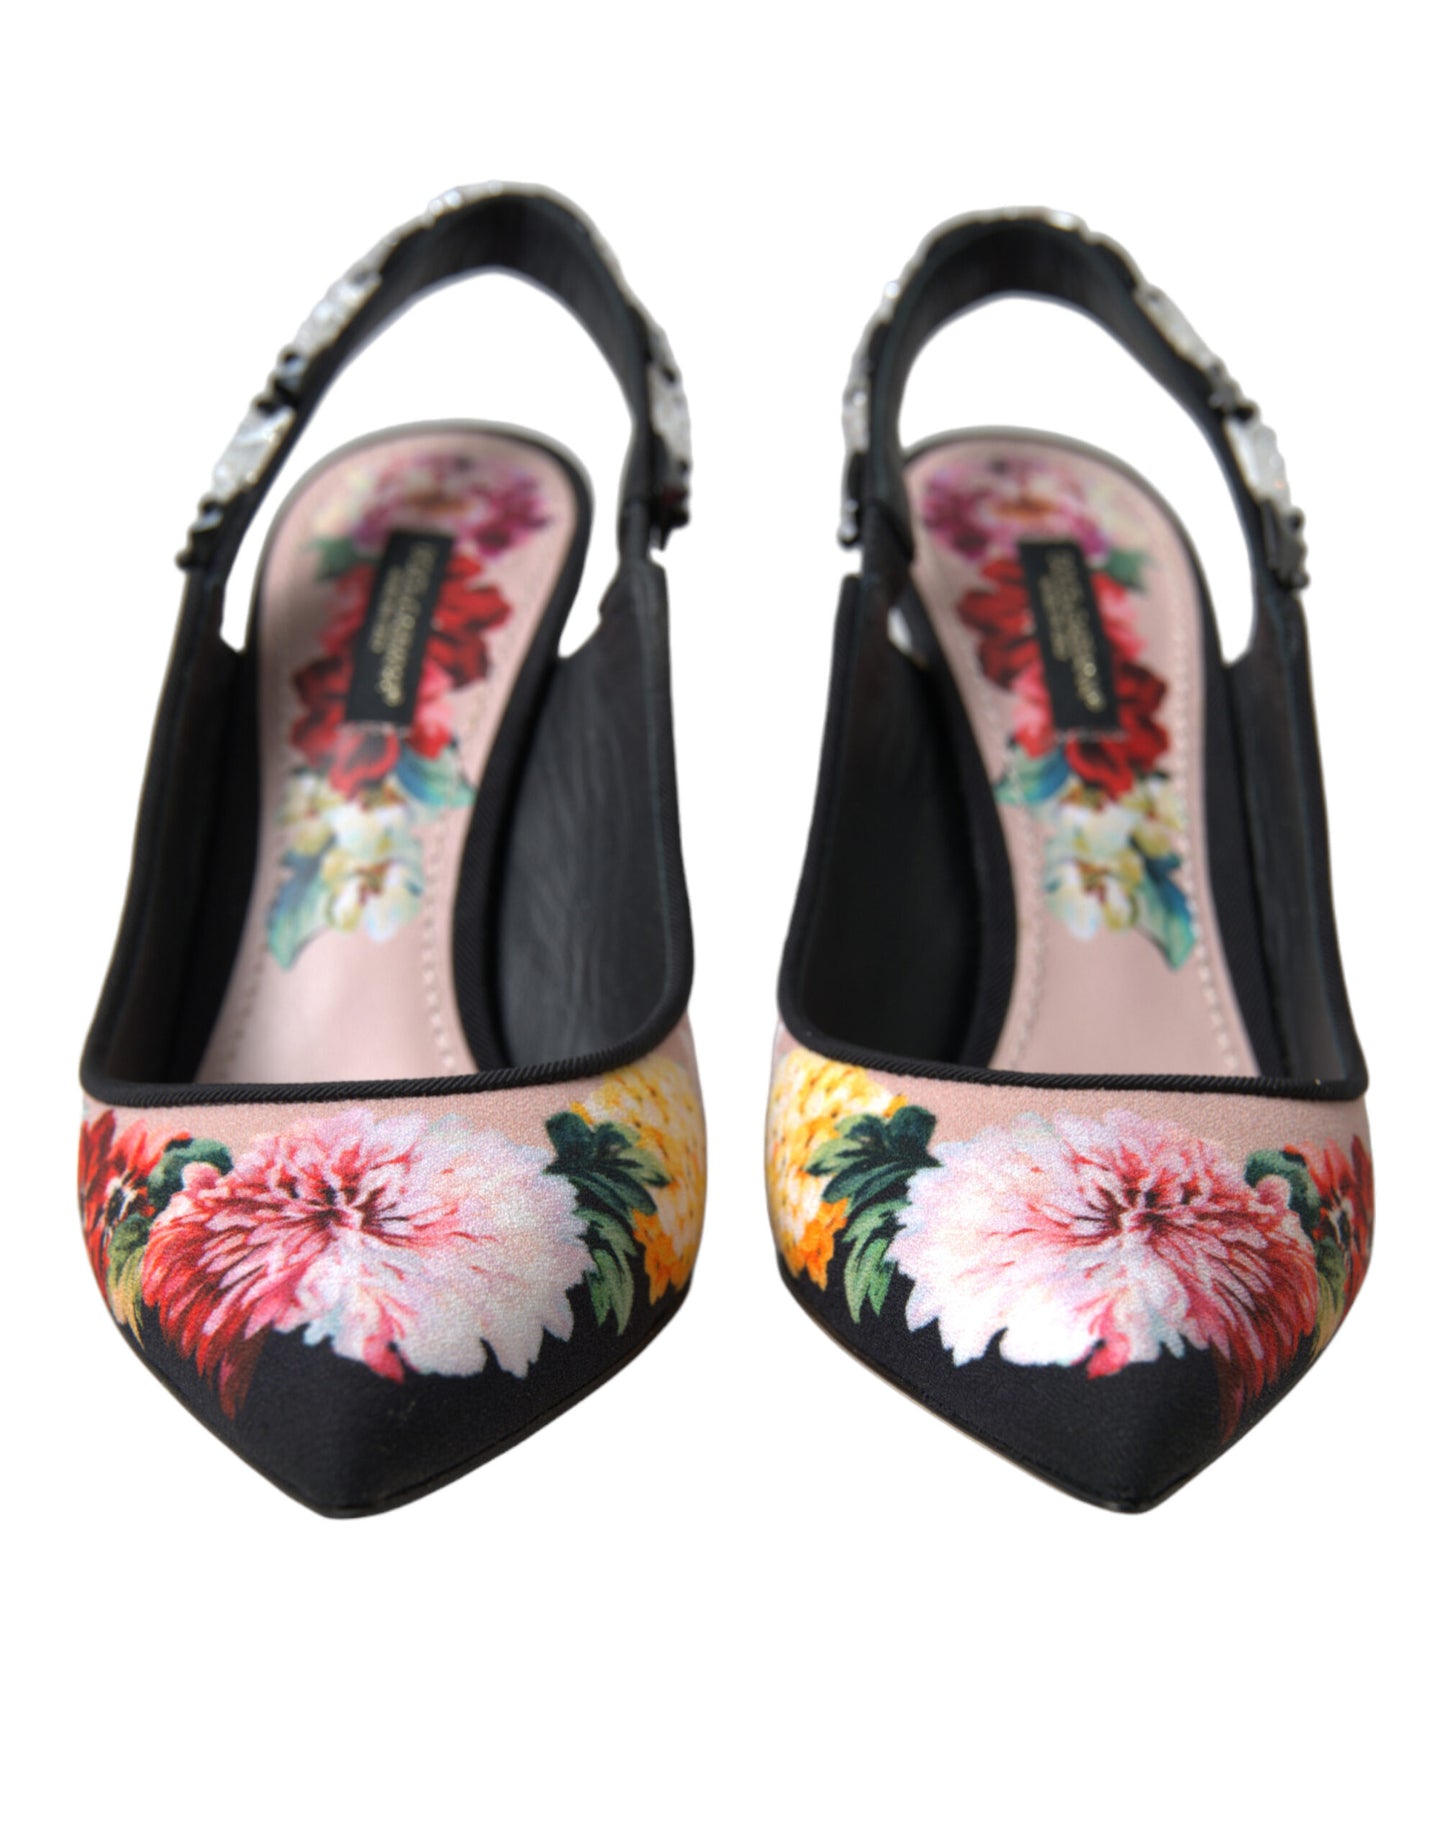 Dolce & Gabbana Floral Slingback Heels with Luxe Crystal Details